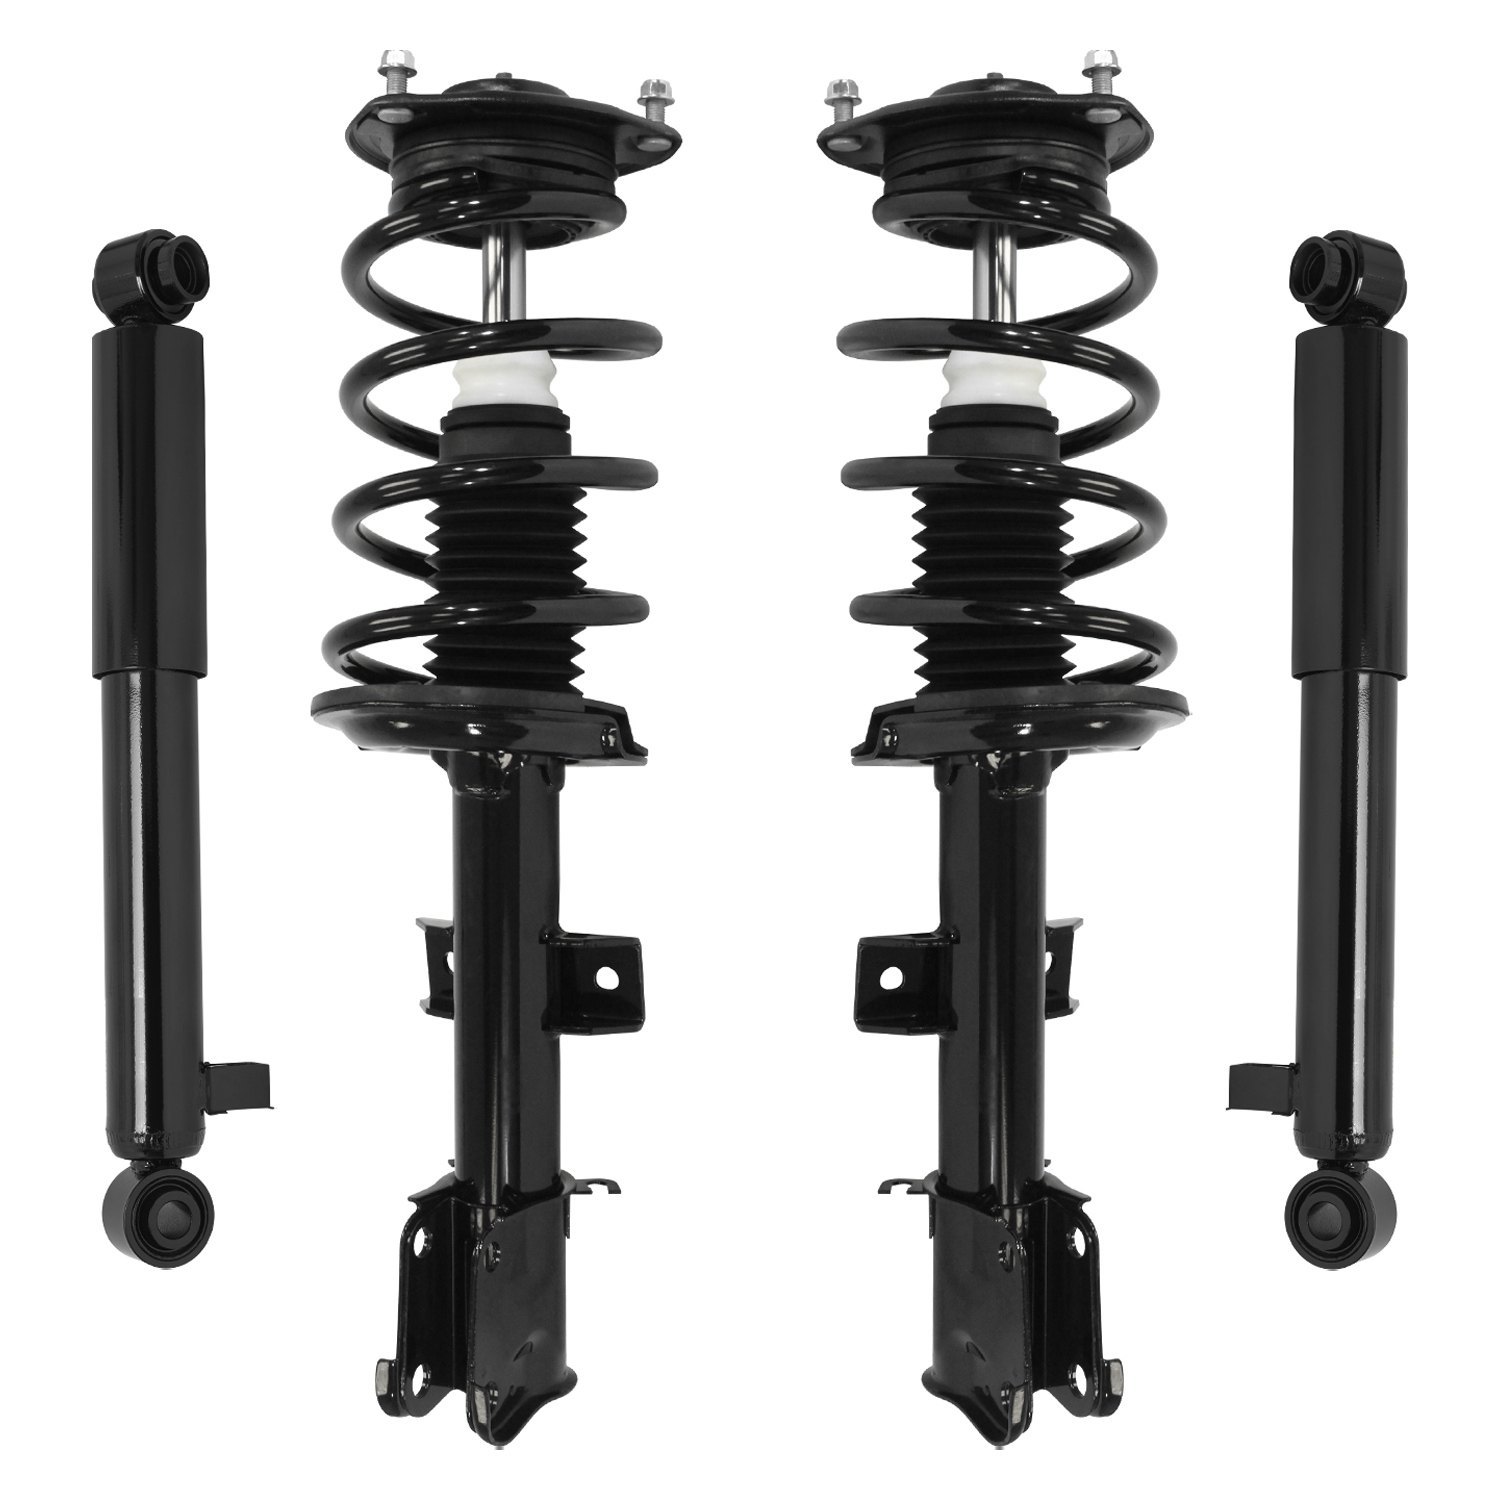 One Year Warranty 2012 for Kia Sorento Front Premium Quality Suspension Strut and Coil Spring Assemblies for Both Left and Right Sides